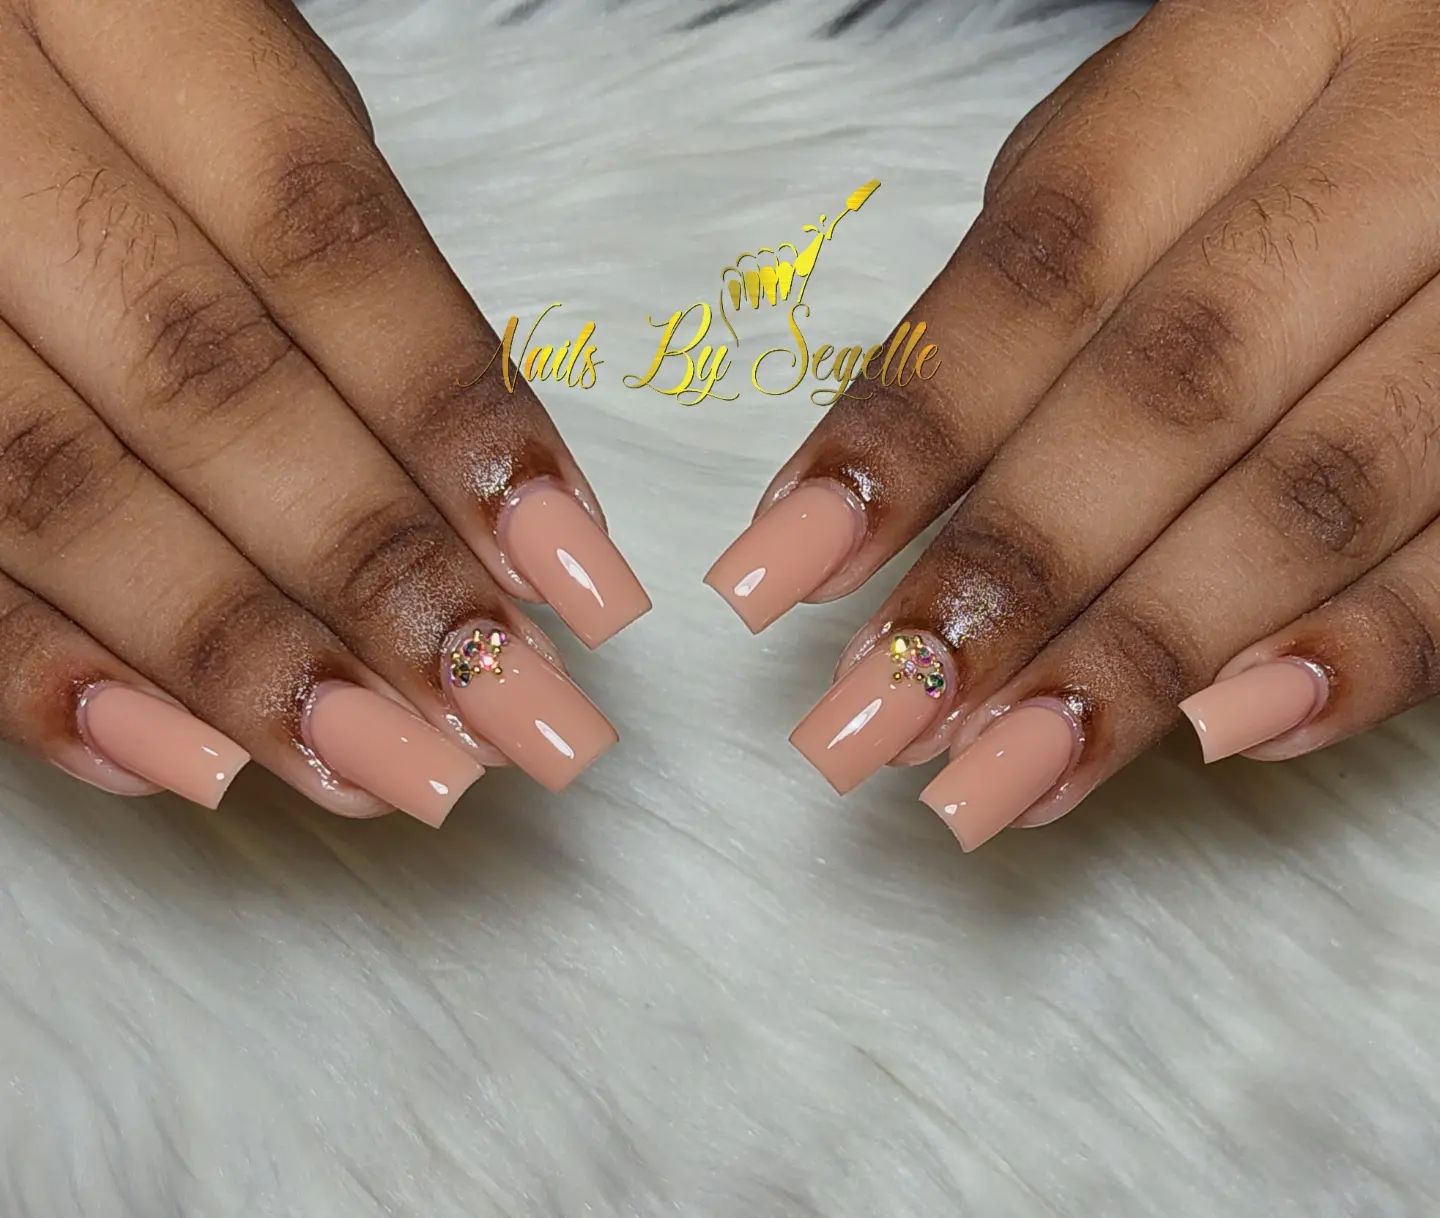 If you enjoy nude nails and elegance this coffin mani will suit you + it can look good with any skin tone.